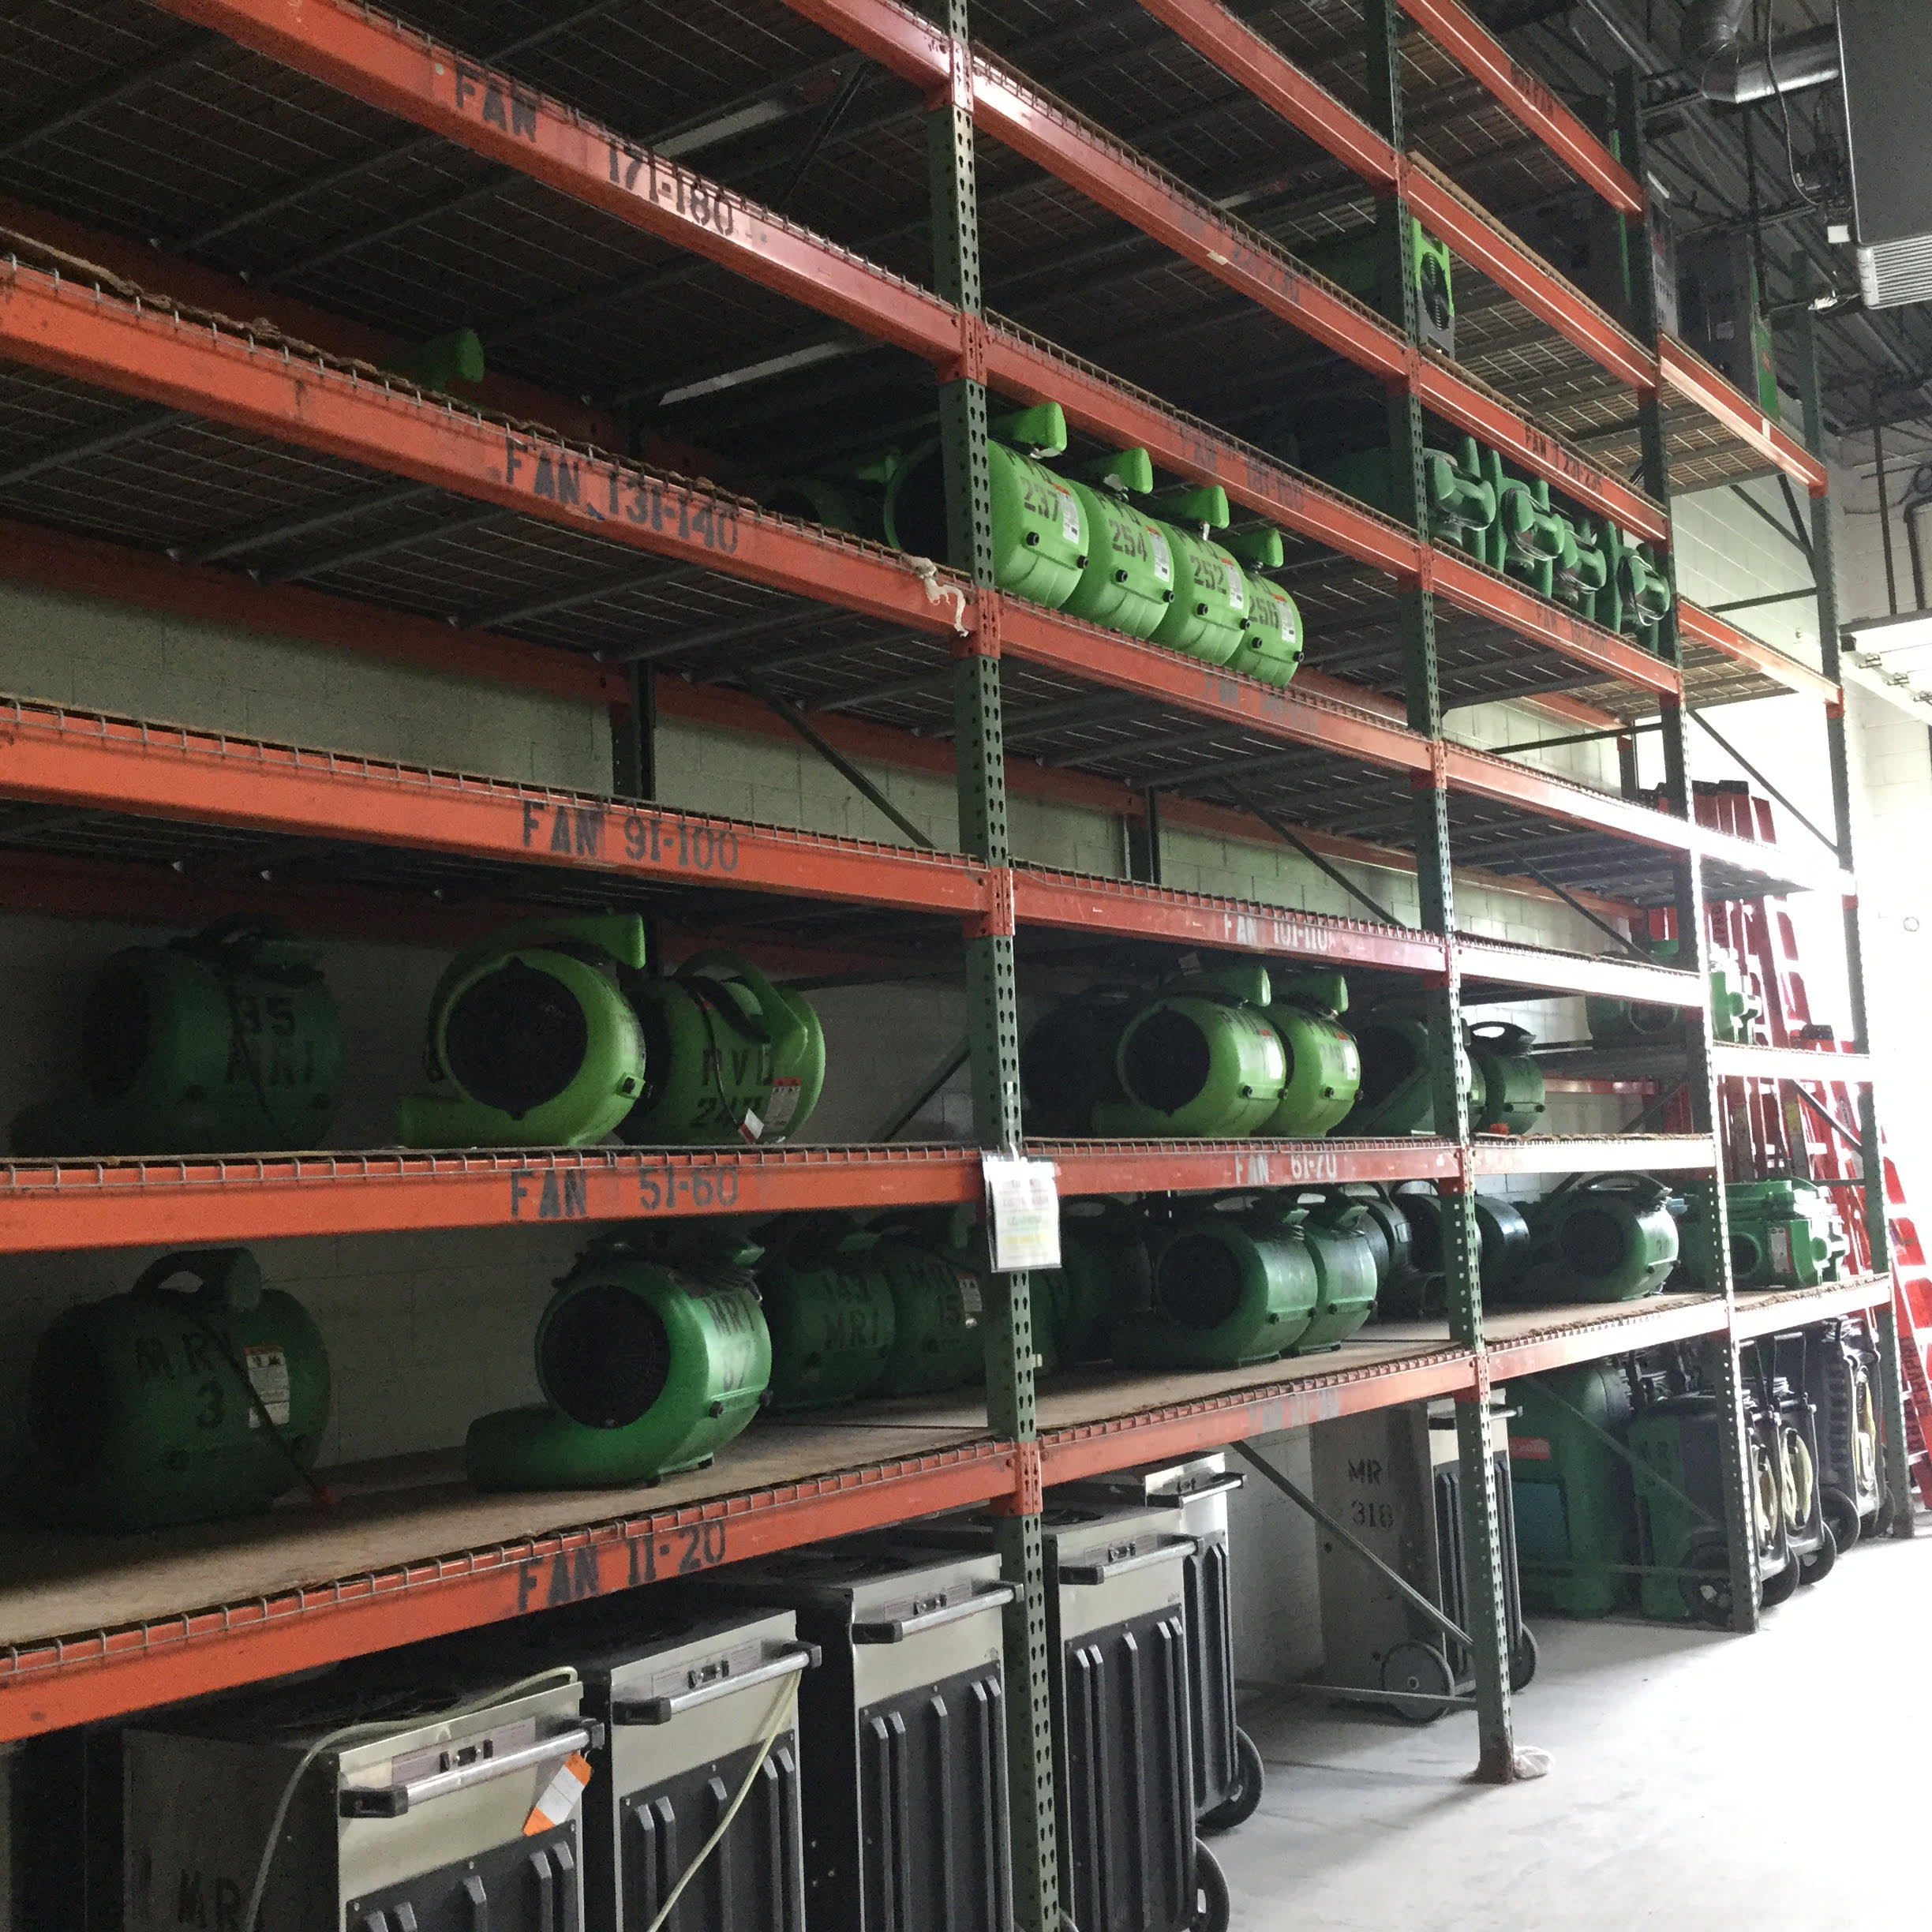 These are our empty racks. SERVPRO of Providence is always out helping people.